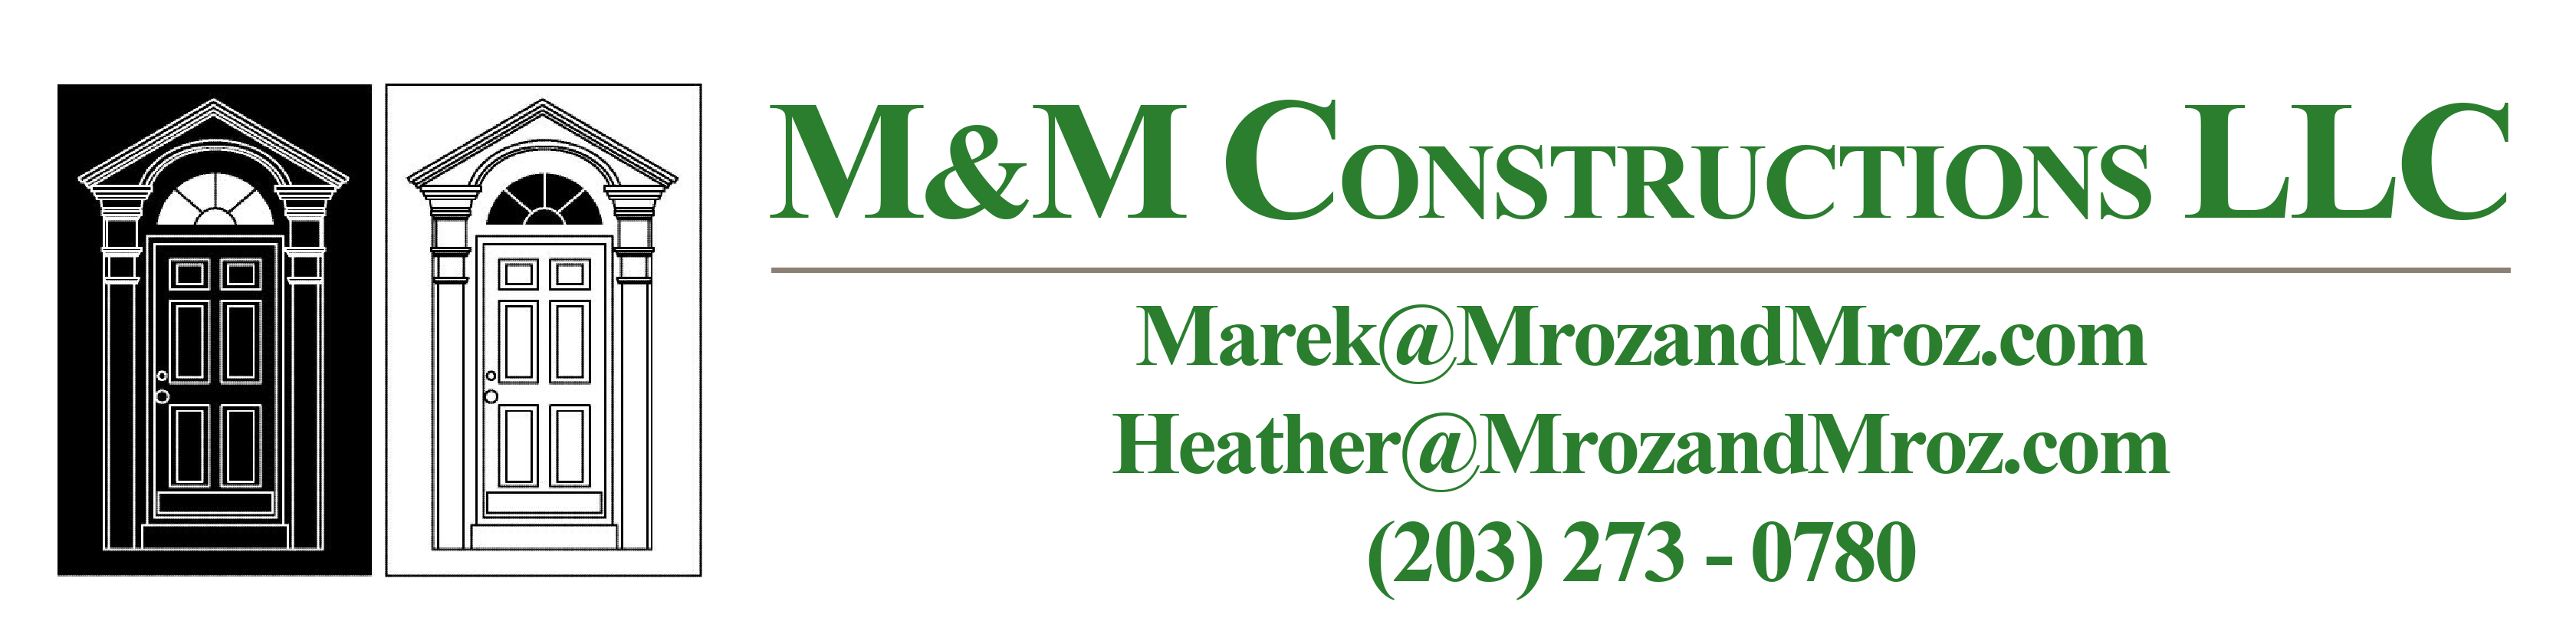 From applications of custom commercial building plans to delivering restorative residential renovations, M&M consistently delivers on-time, on-budget projects with skill — and has since 2003